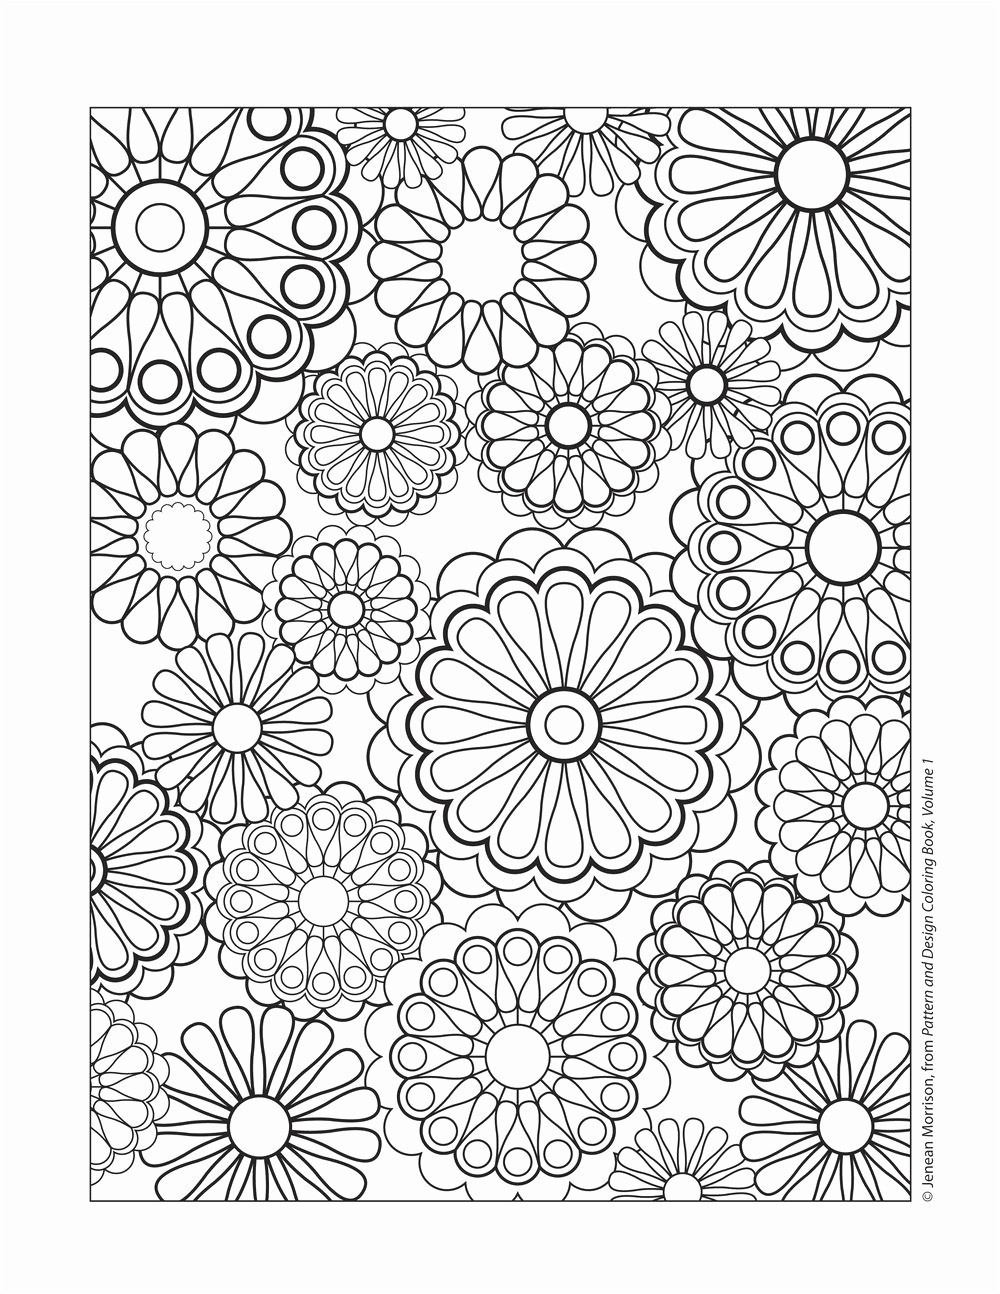 Interactive Coloring Pages Coloring Ideas Coloring Pagese Game Gallery Sheets Ideas